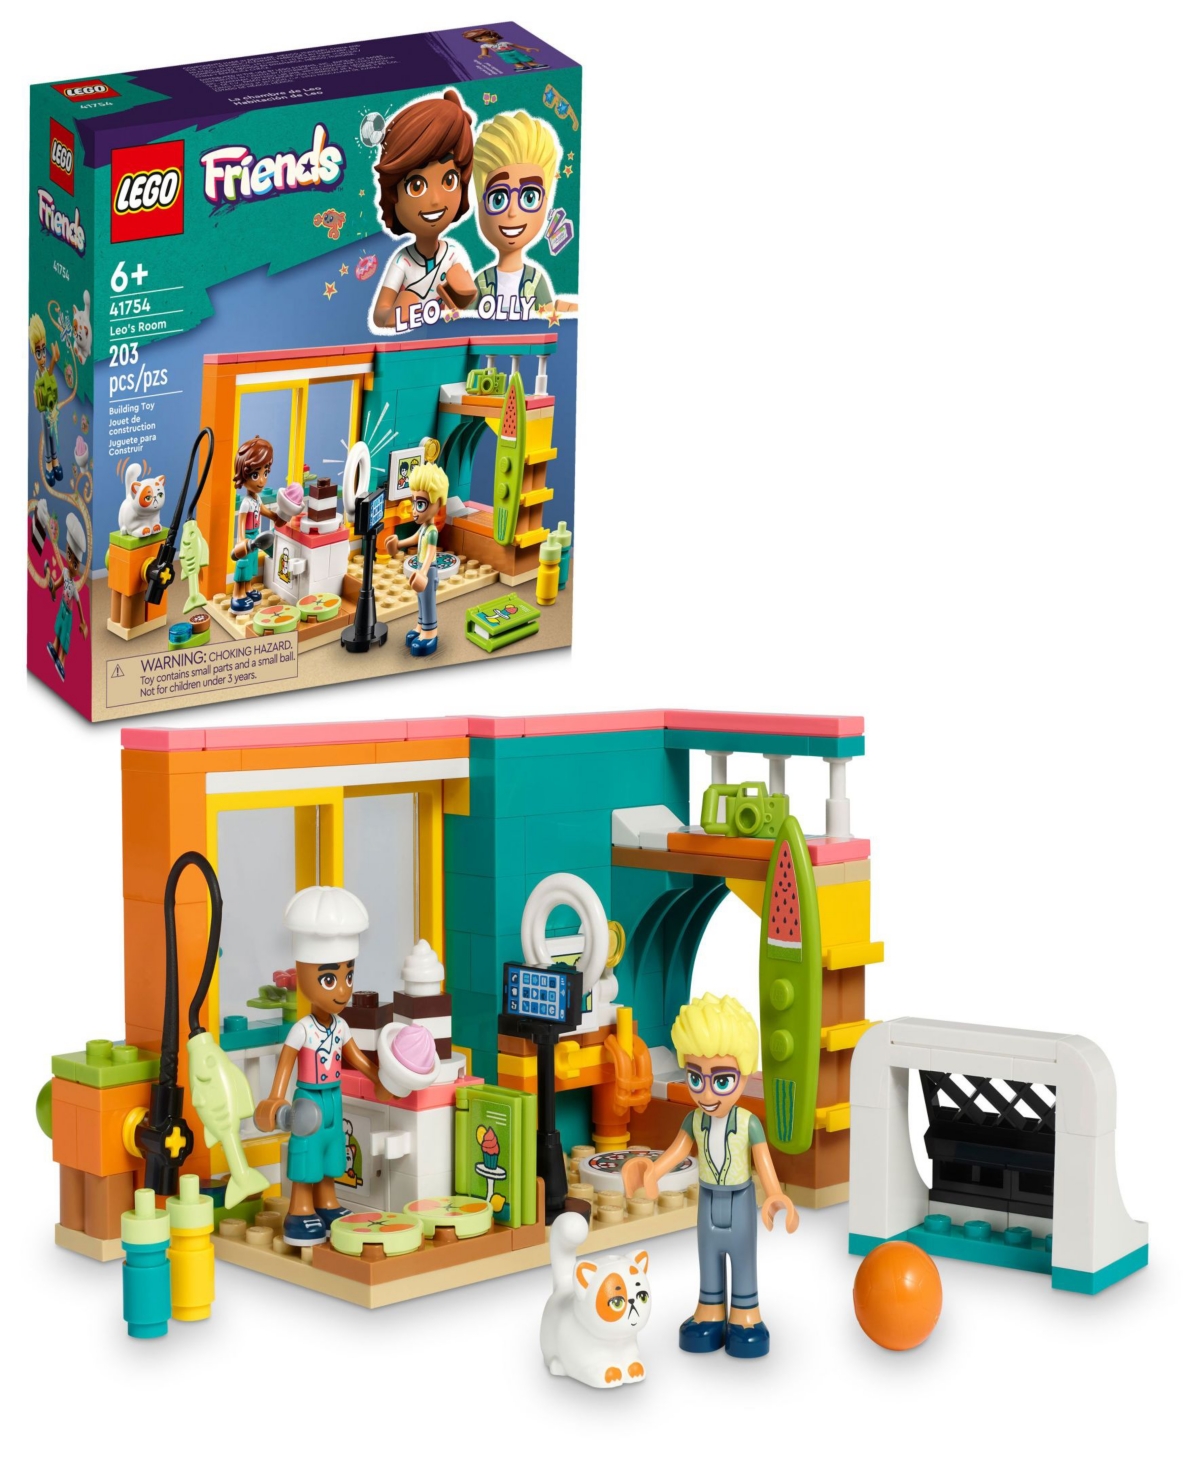 Lego Babies' Friends Leo's Room 41754 Toy Building Set With Leo, Olly And Cat Figures In Multicolor